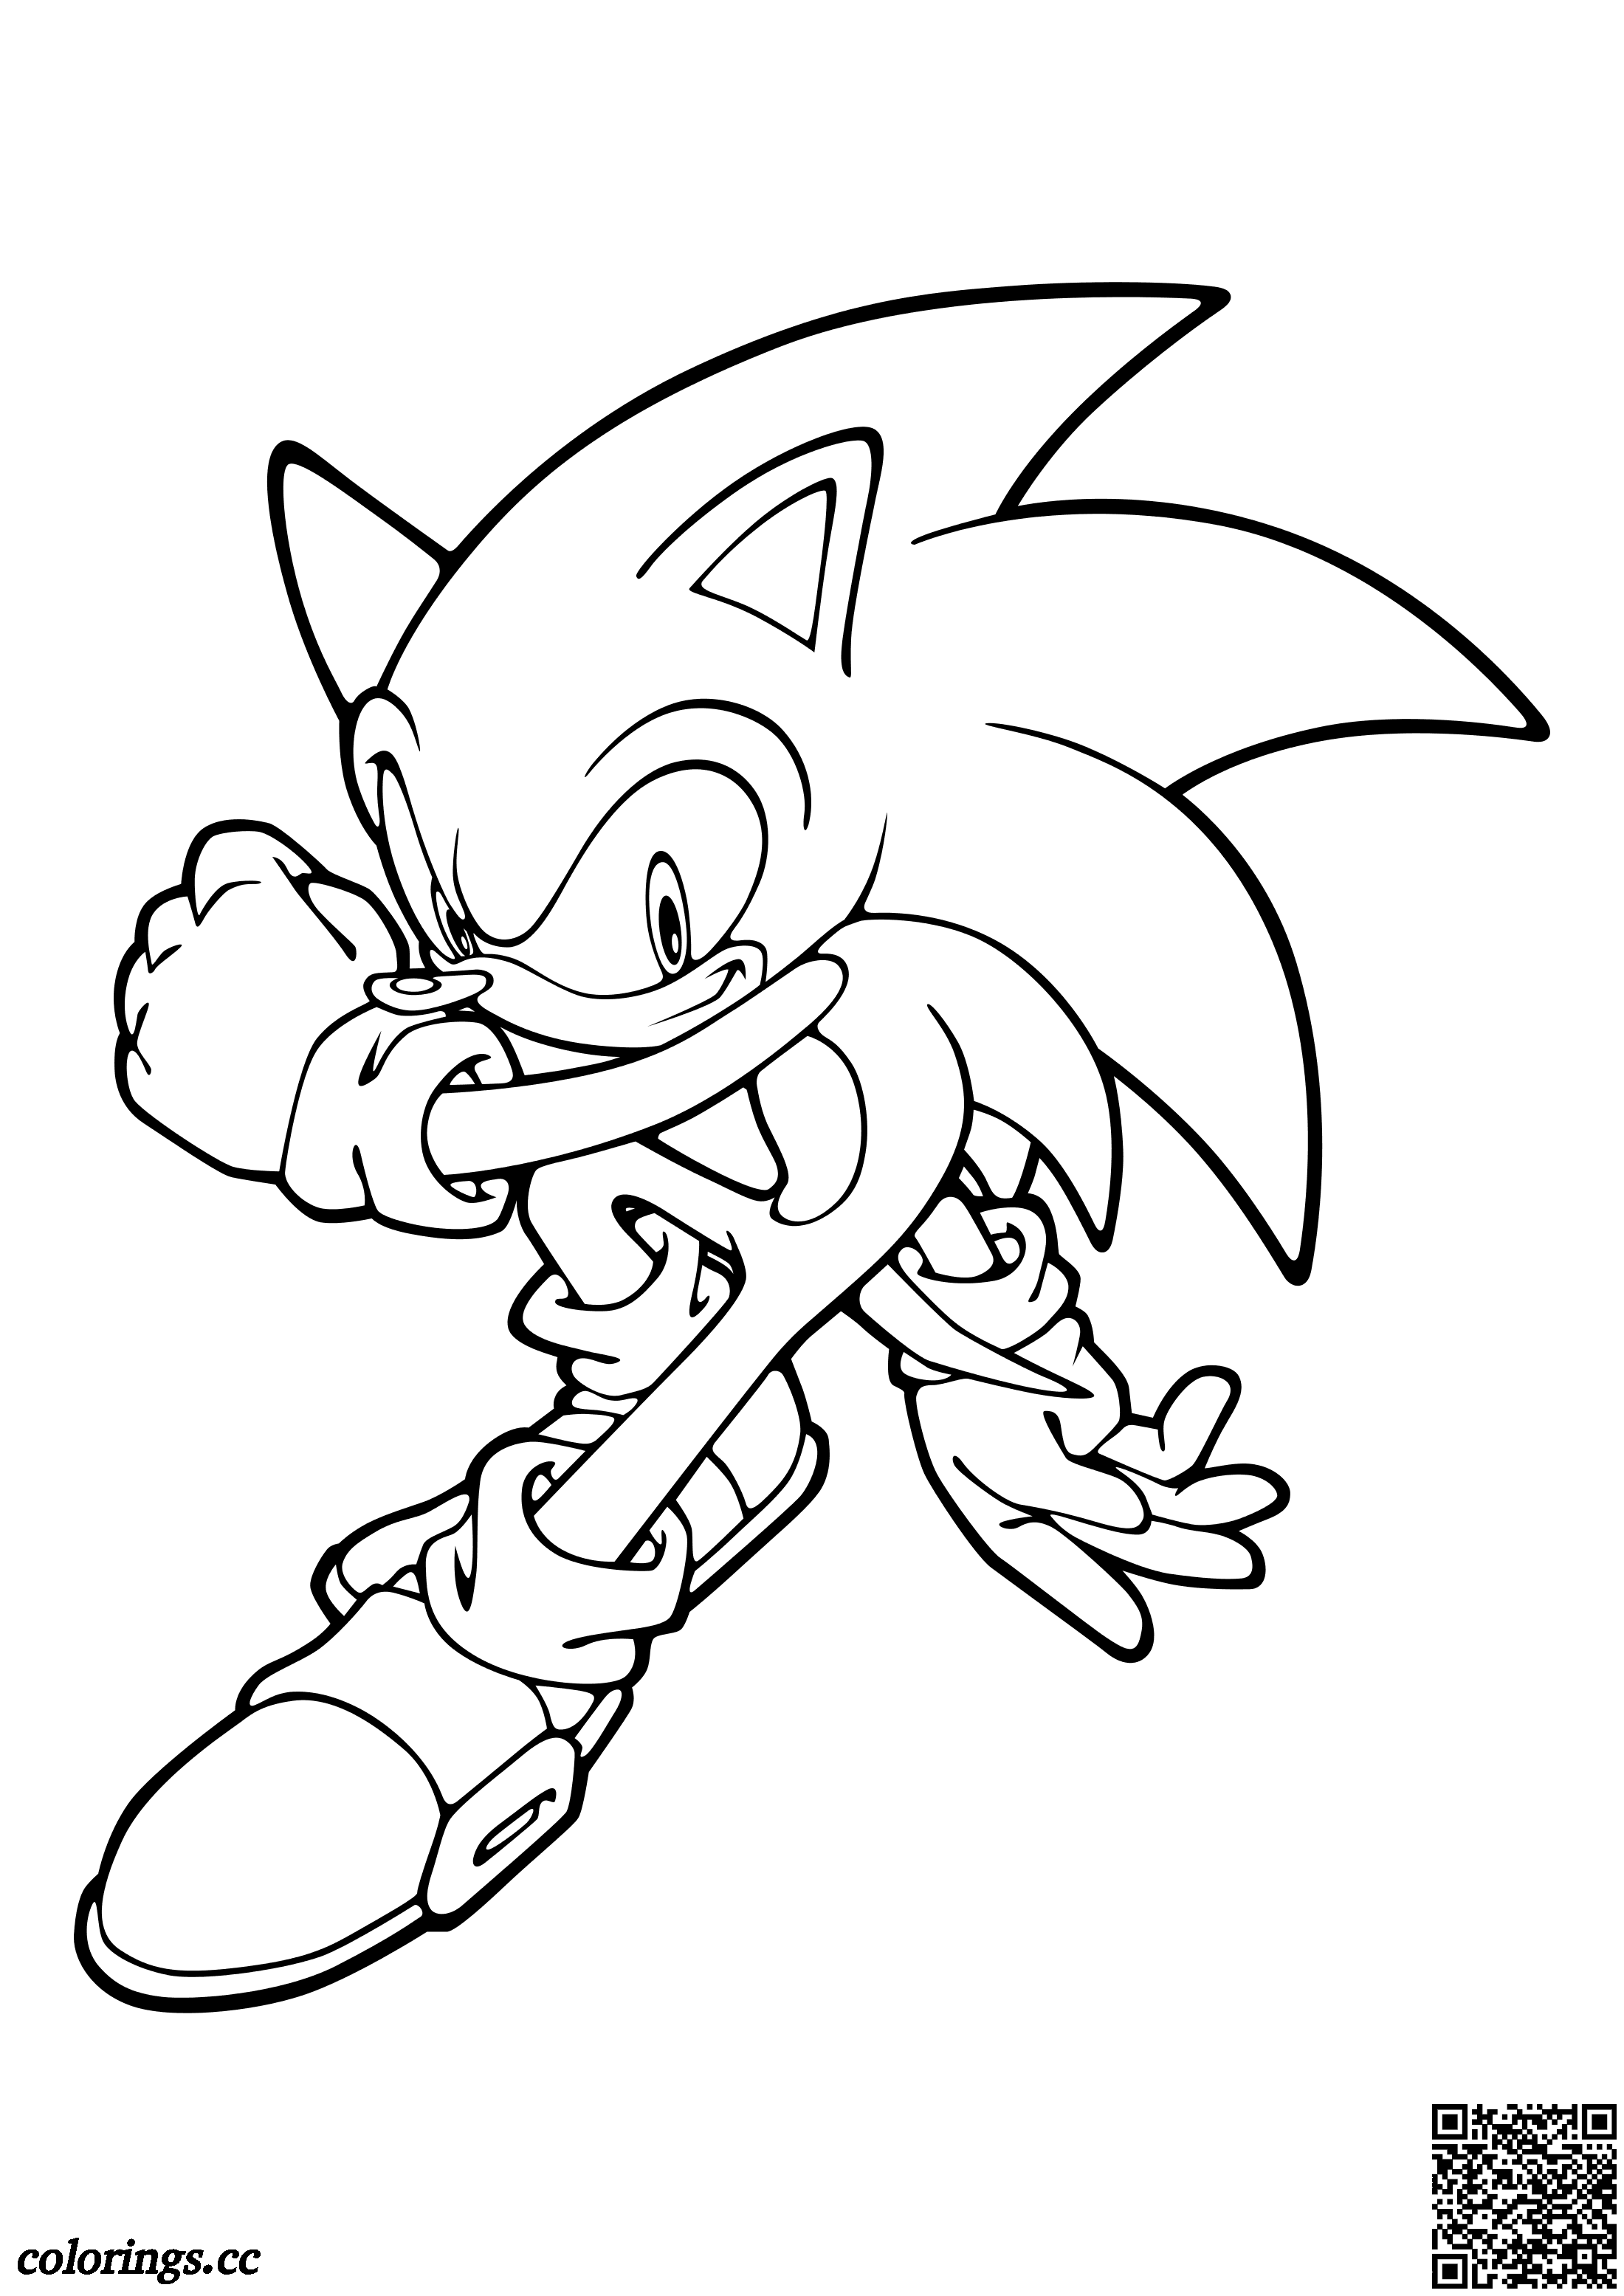 Energetic Sonic the Hedgehog coloring pages, Sonic the Hedgehog ...